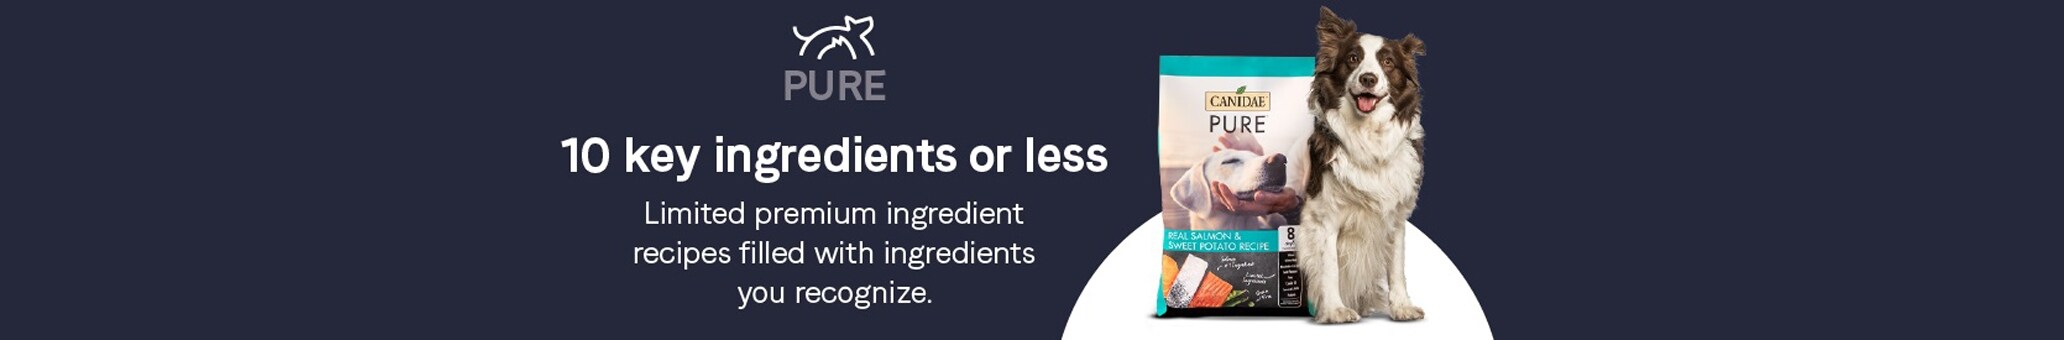 Pure. 10 key ingredients or less. Limited premium ingredient recipes with ingredients you recognize.